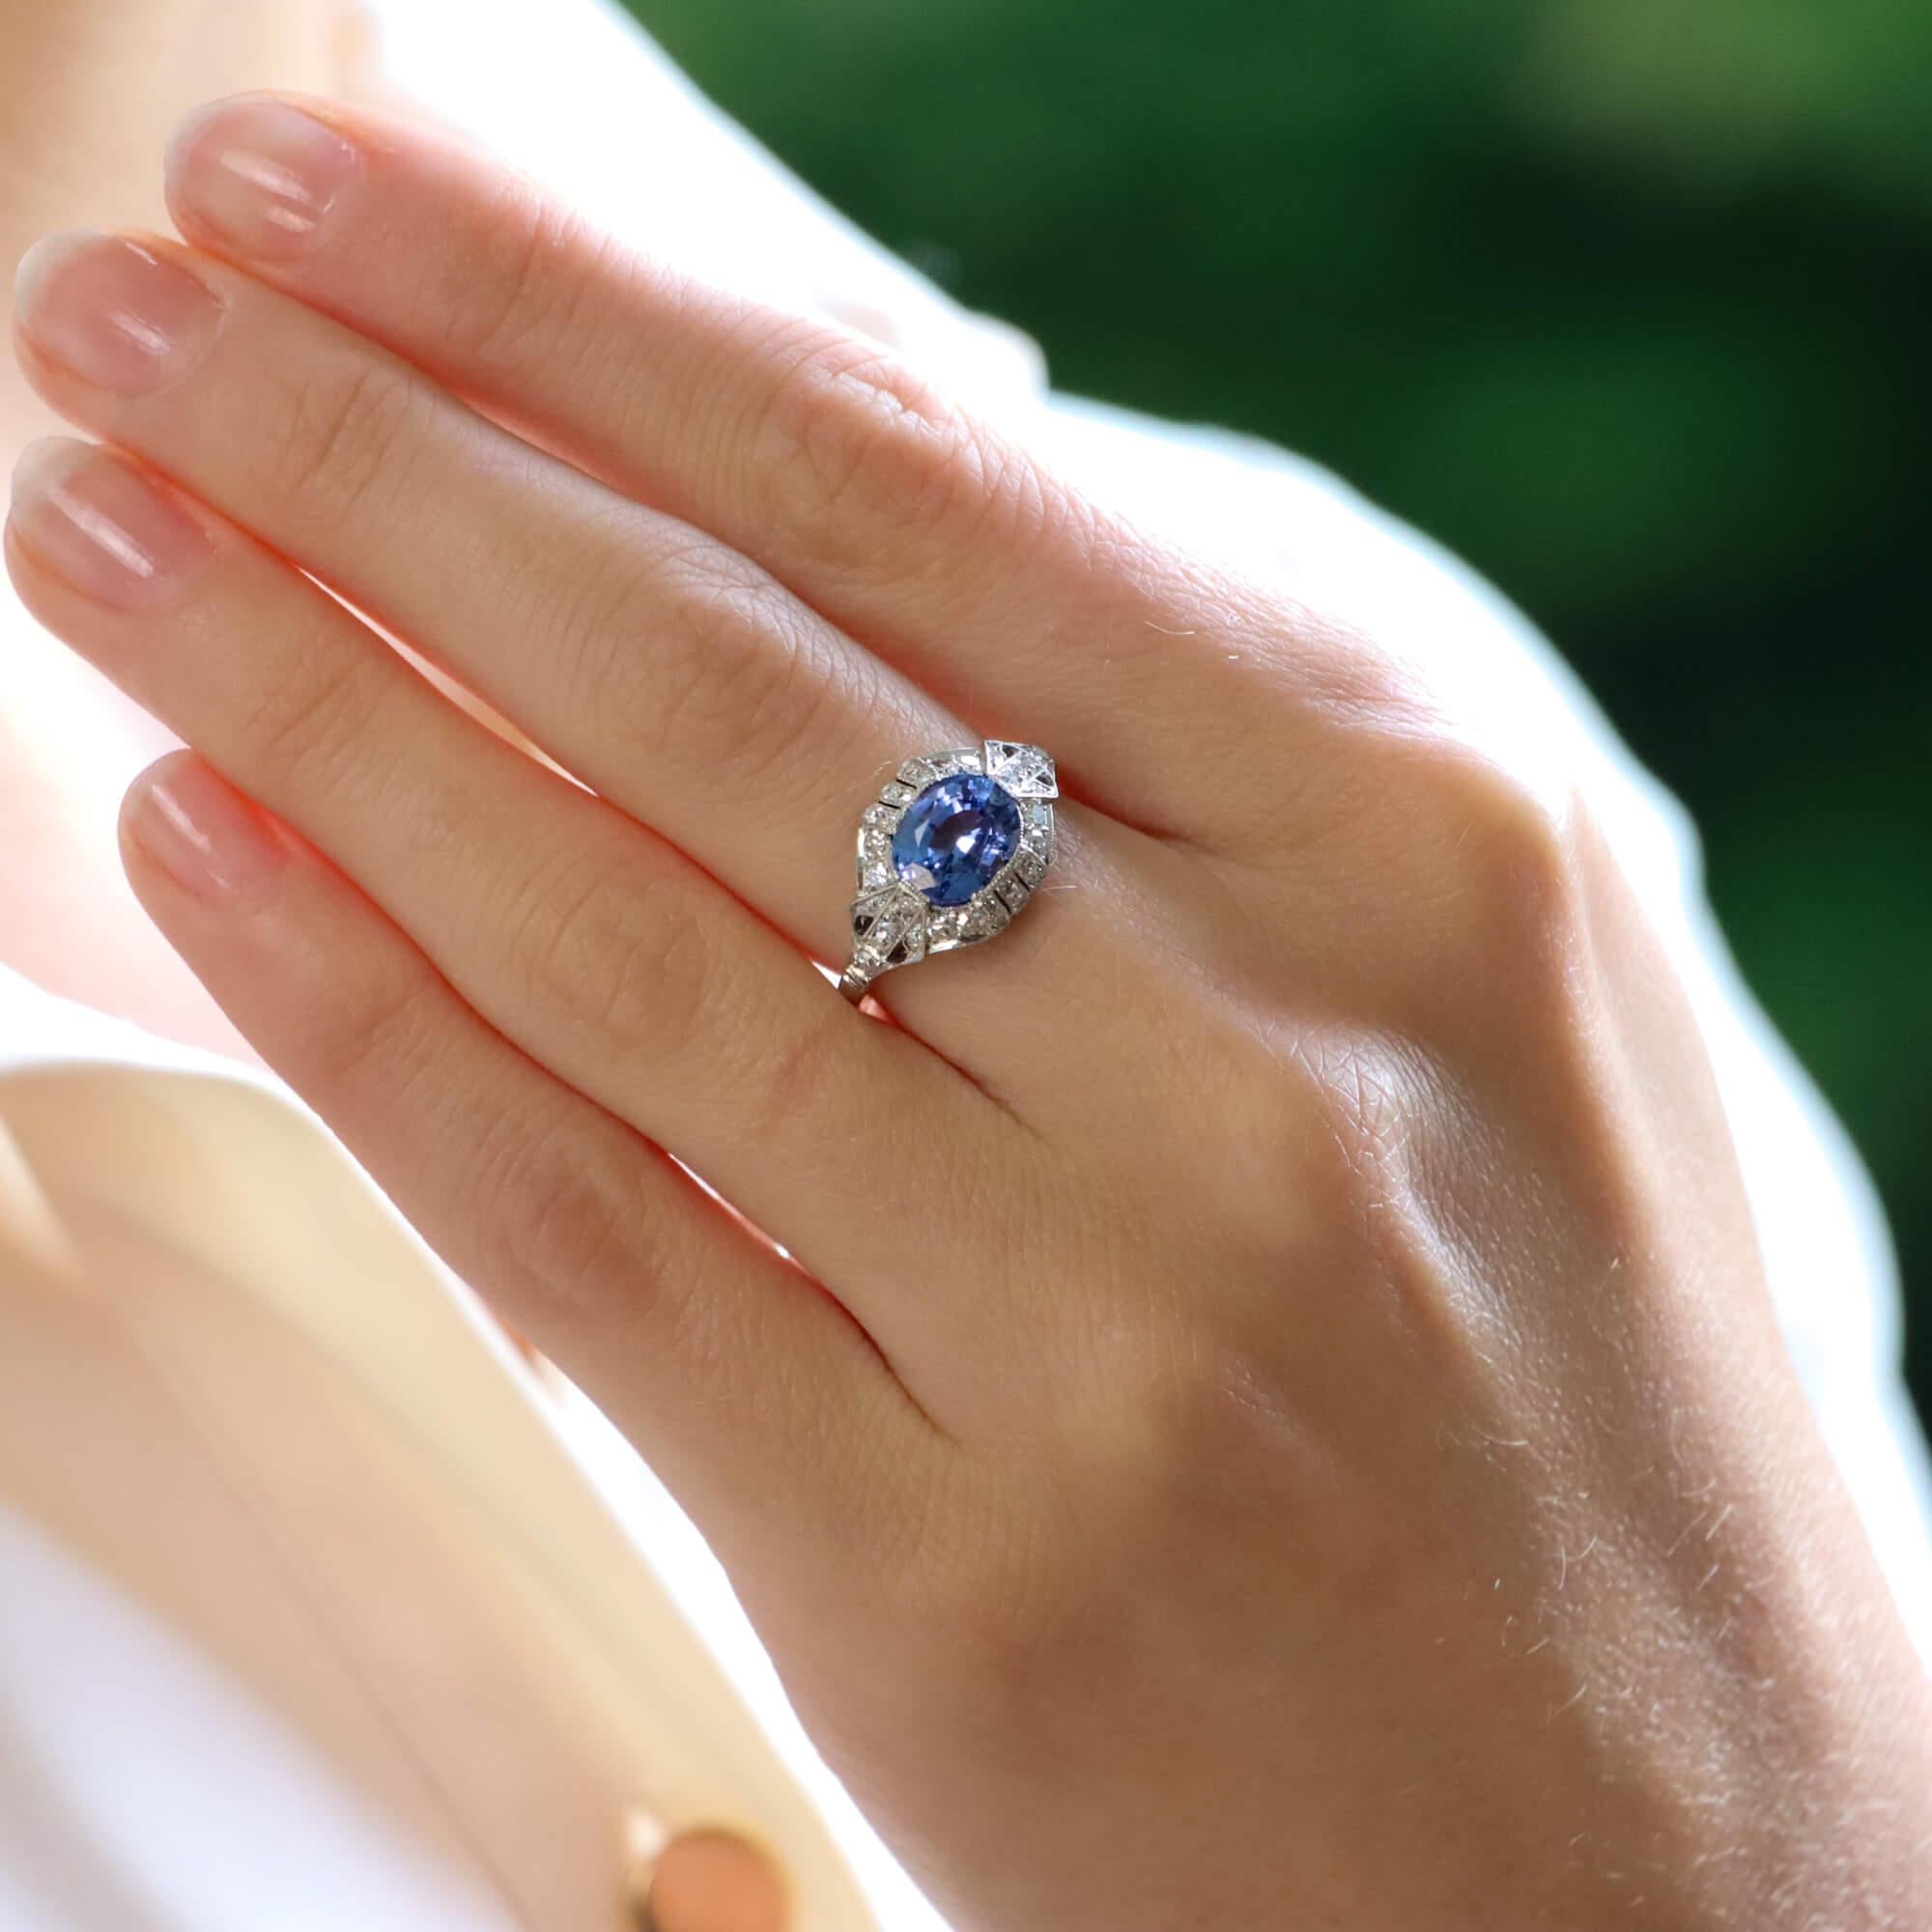 A beautiful Art Deco sapphire and diamond ring, set in platinum.

The ring is composed in a geometric cluster design, set centrally with large oval cornflower blue sapphire. The sapphire is set amongst panels of old cut diamonds which beautifully